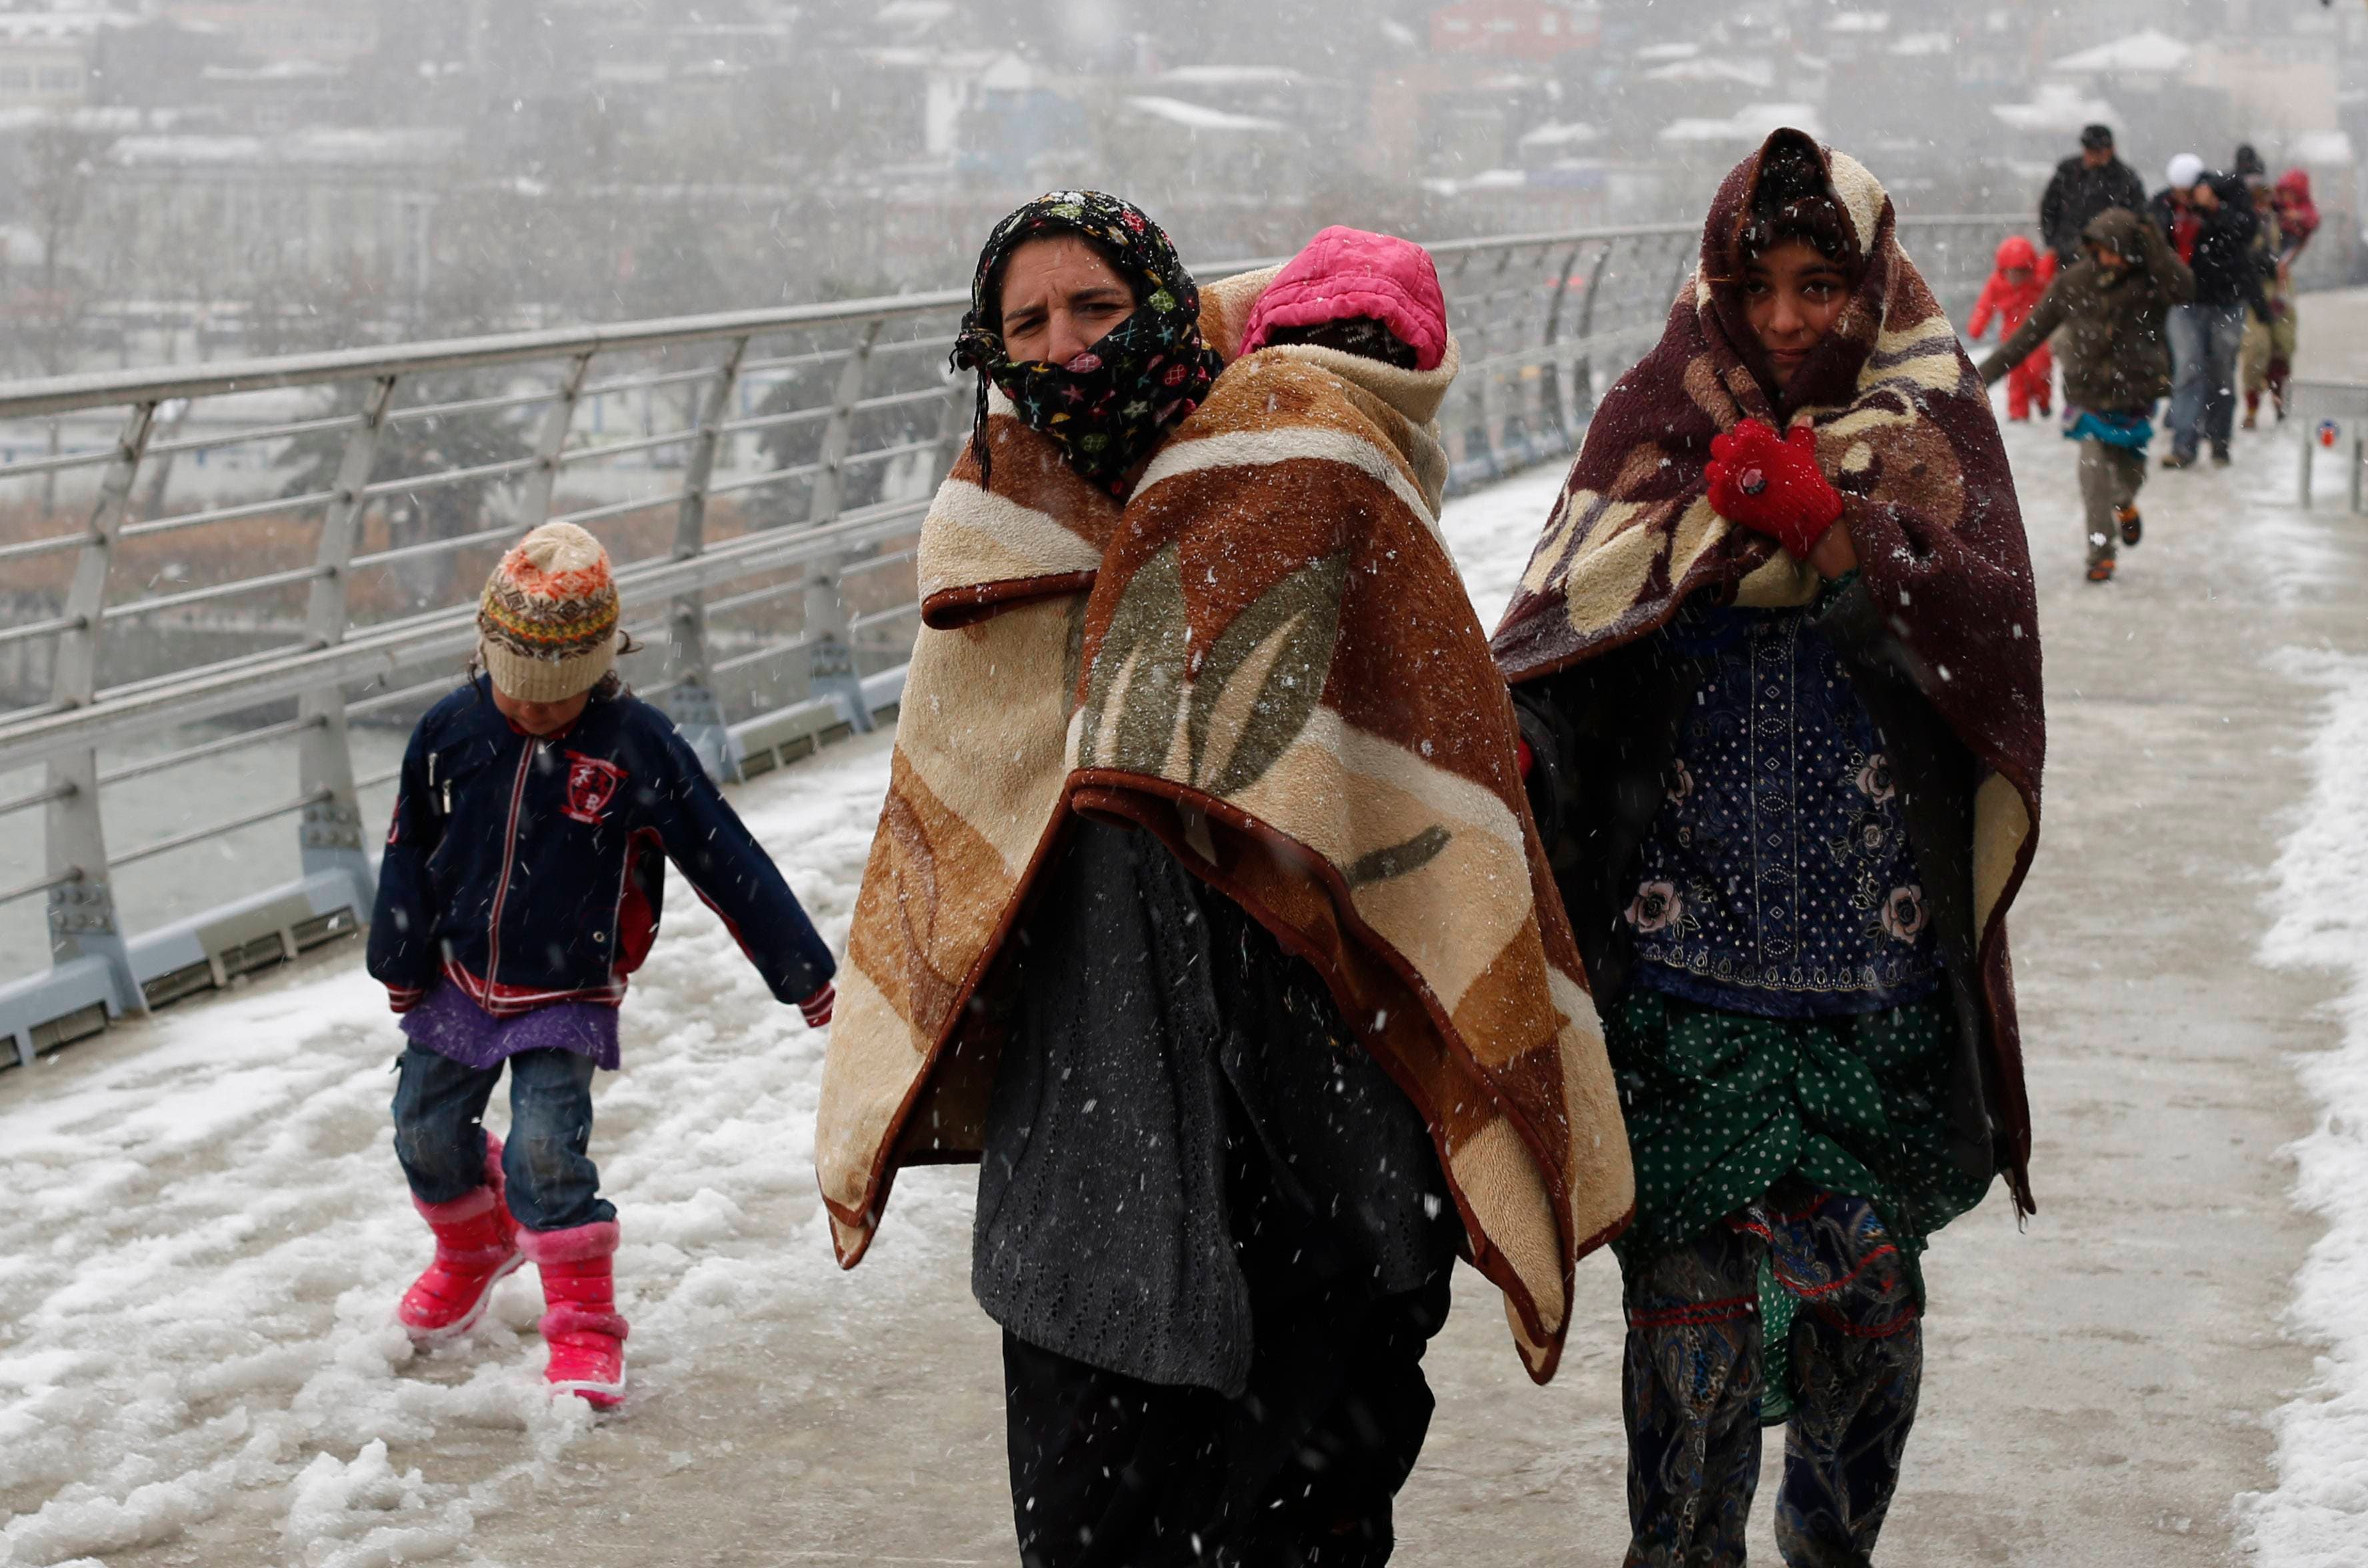 Syrian refugees brave the cold and snow as they walk to a metro station in Istanbul February 11, 2015, at the start of a day’s begging. (Reuters)